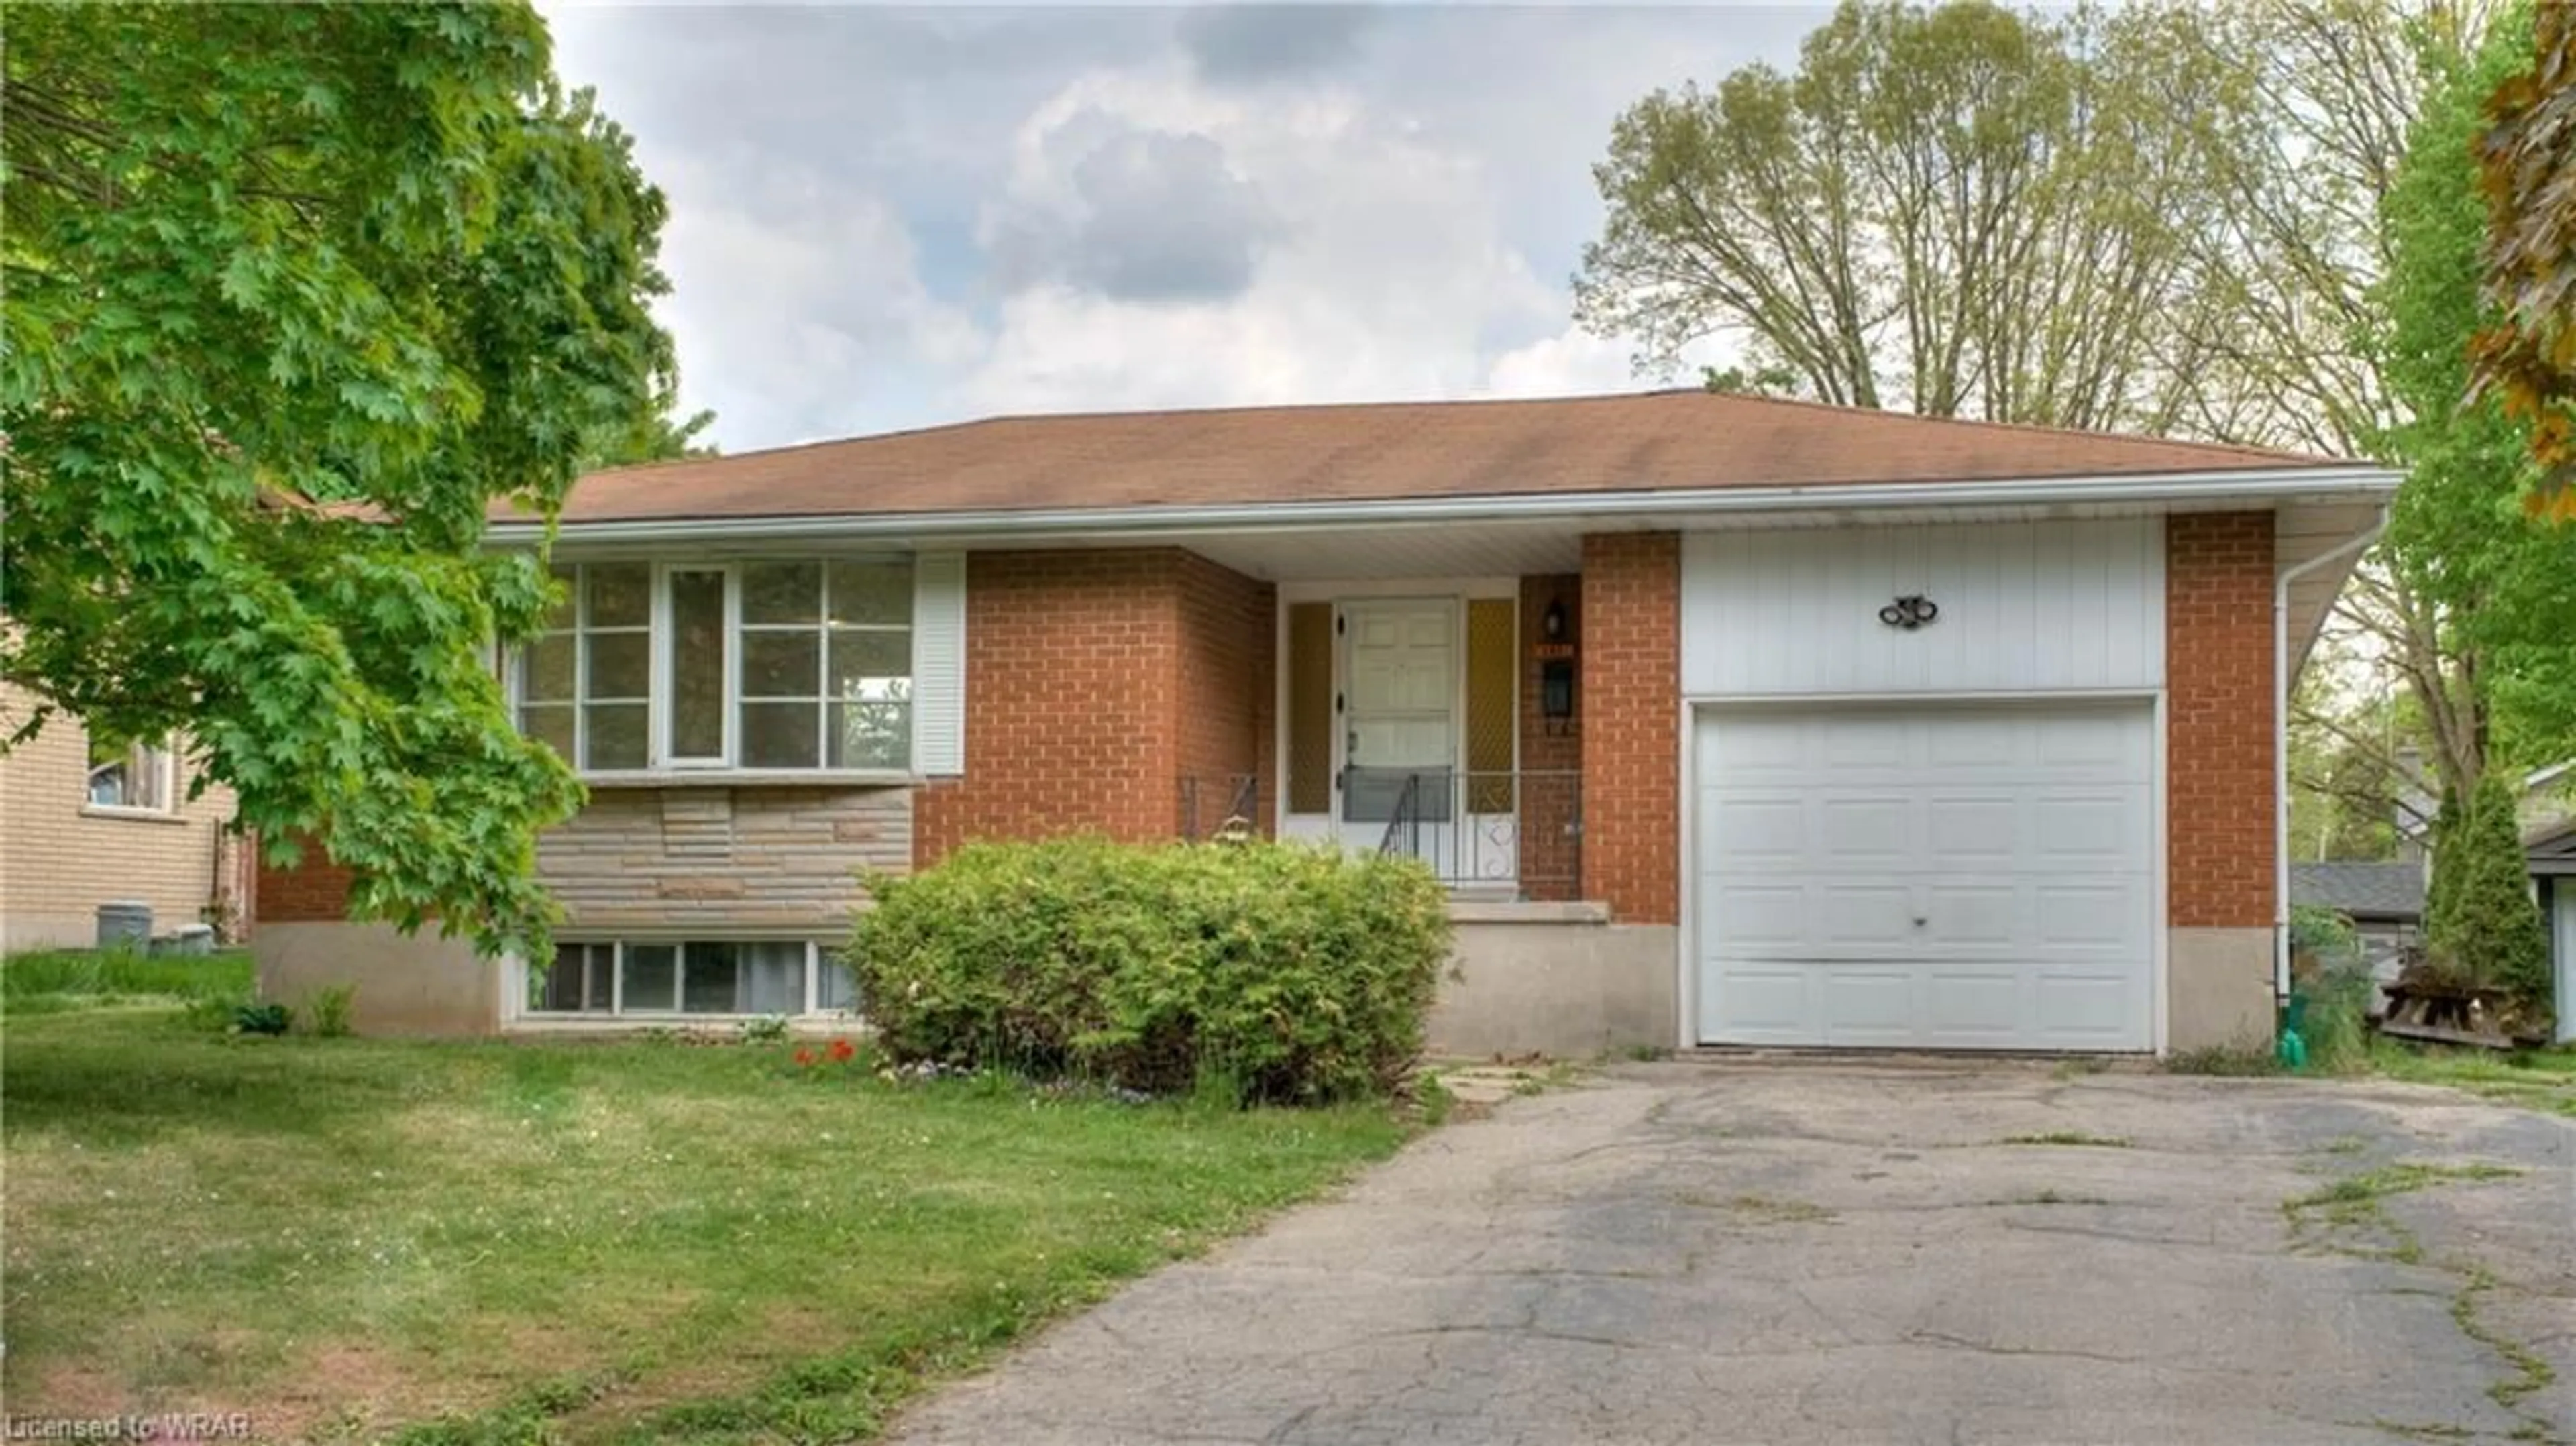 Home with brick exterior material for 182 Lynnbrook Cres, Waterloo Ontario N2L 4X3